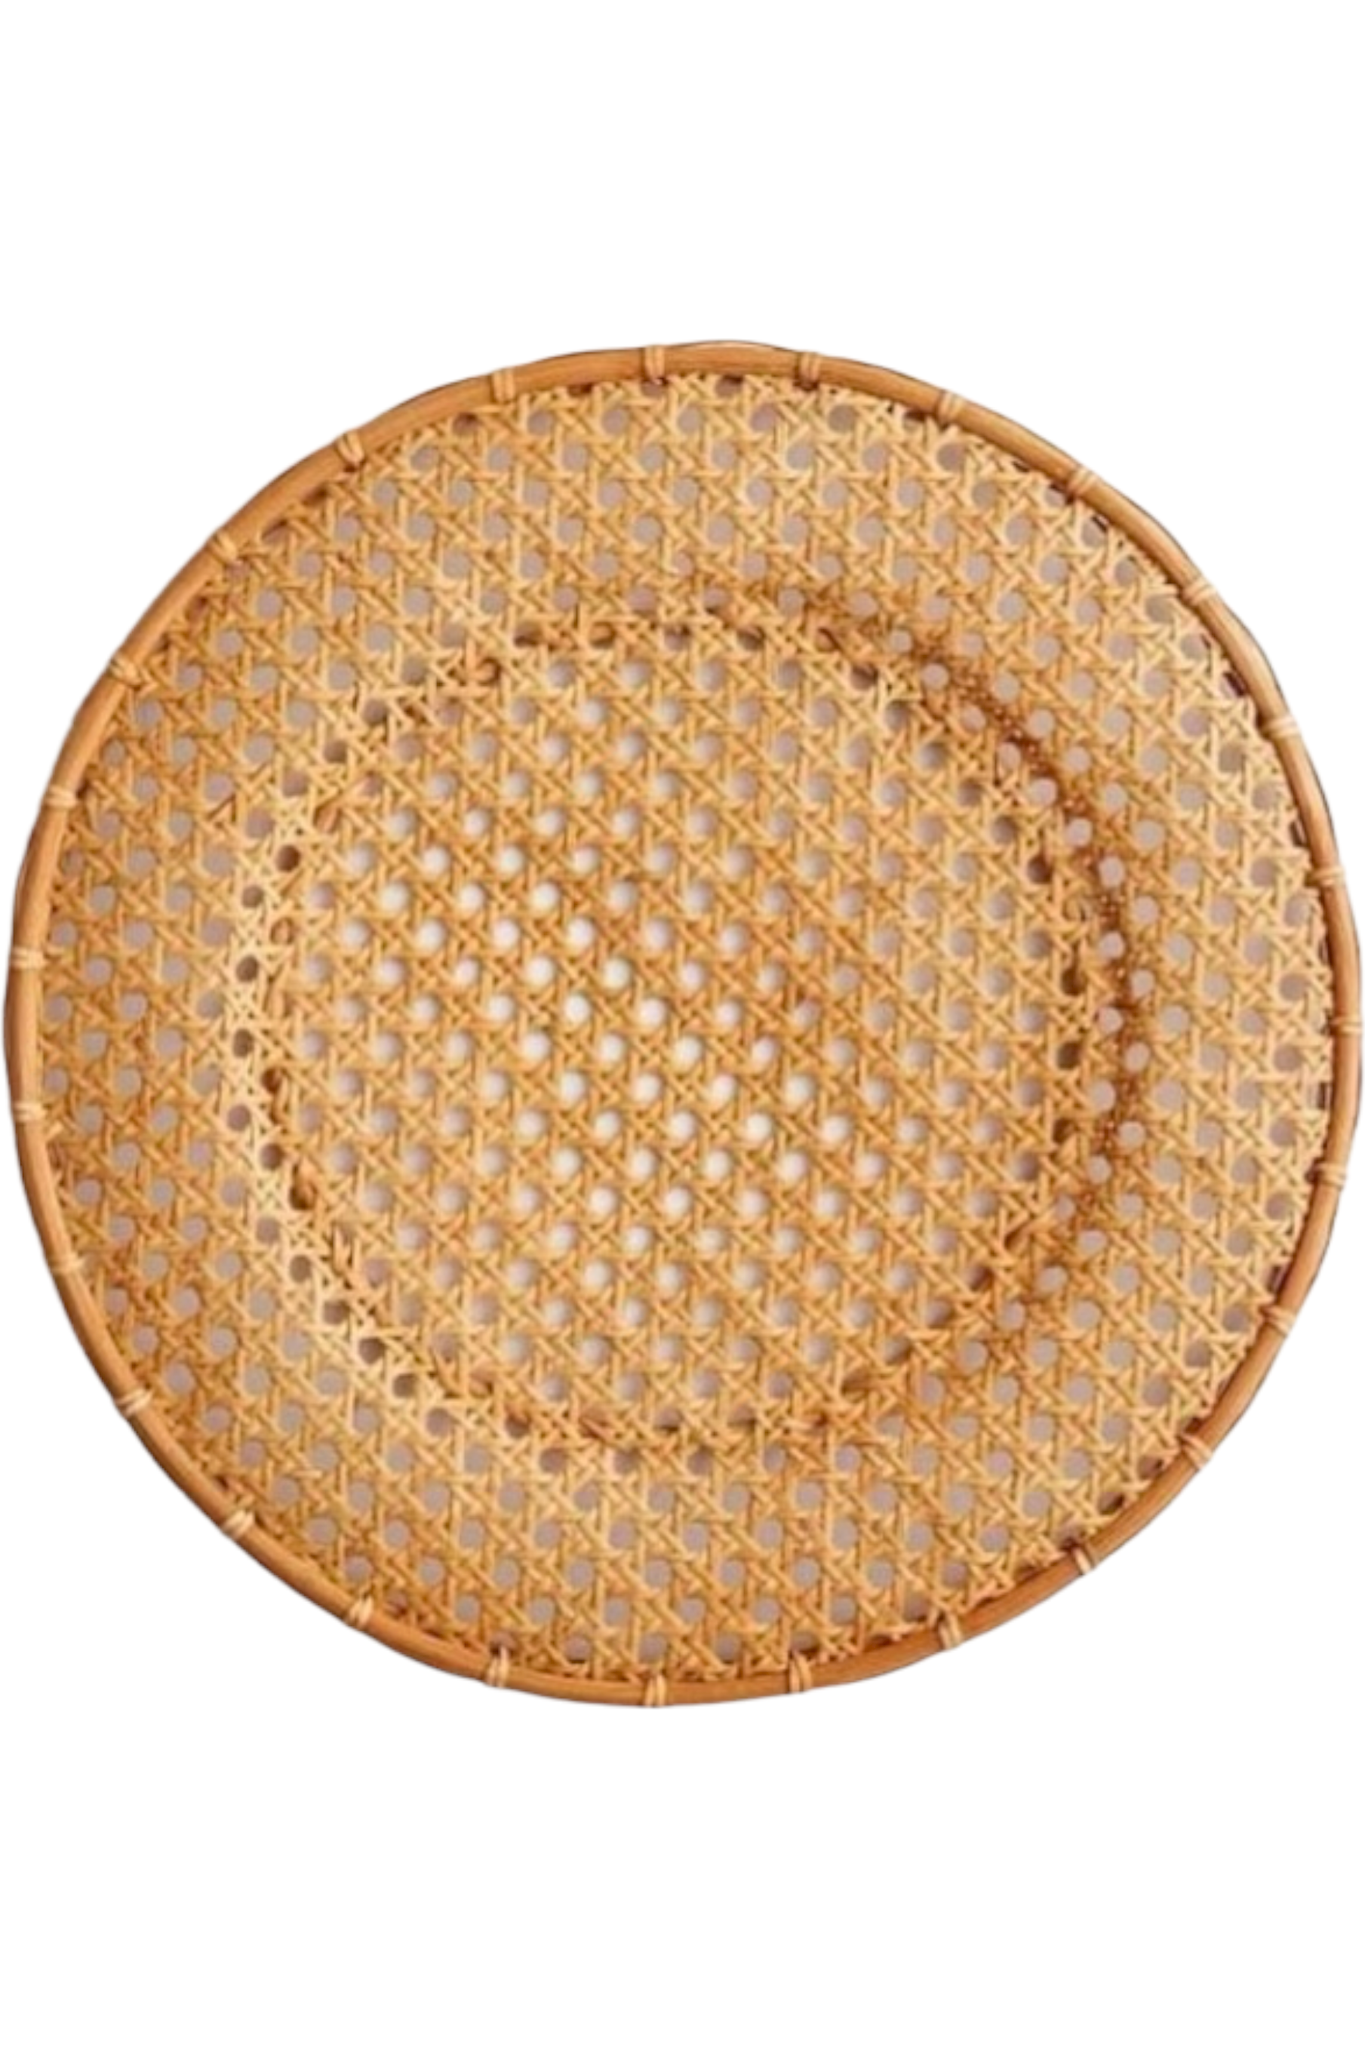 French Cane Charger Plates - set of 4